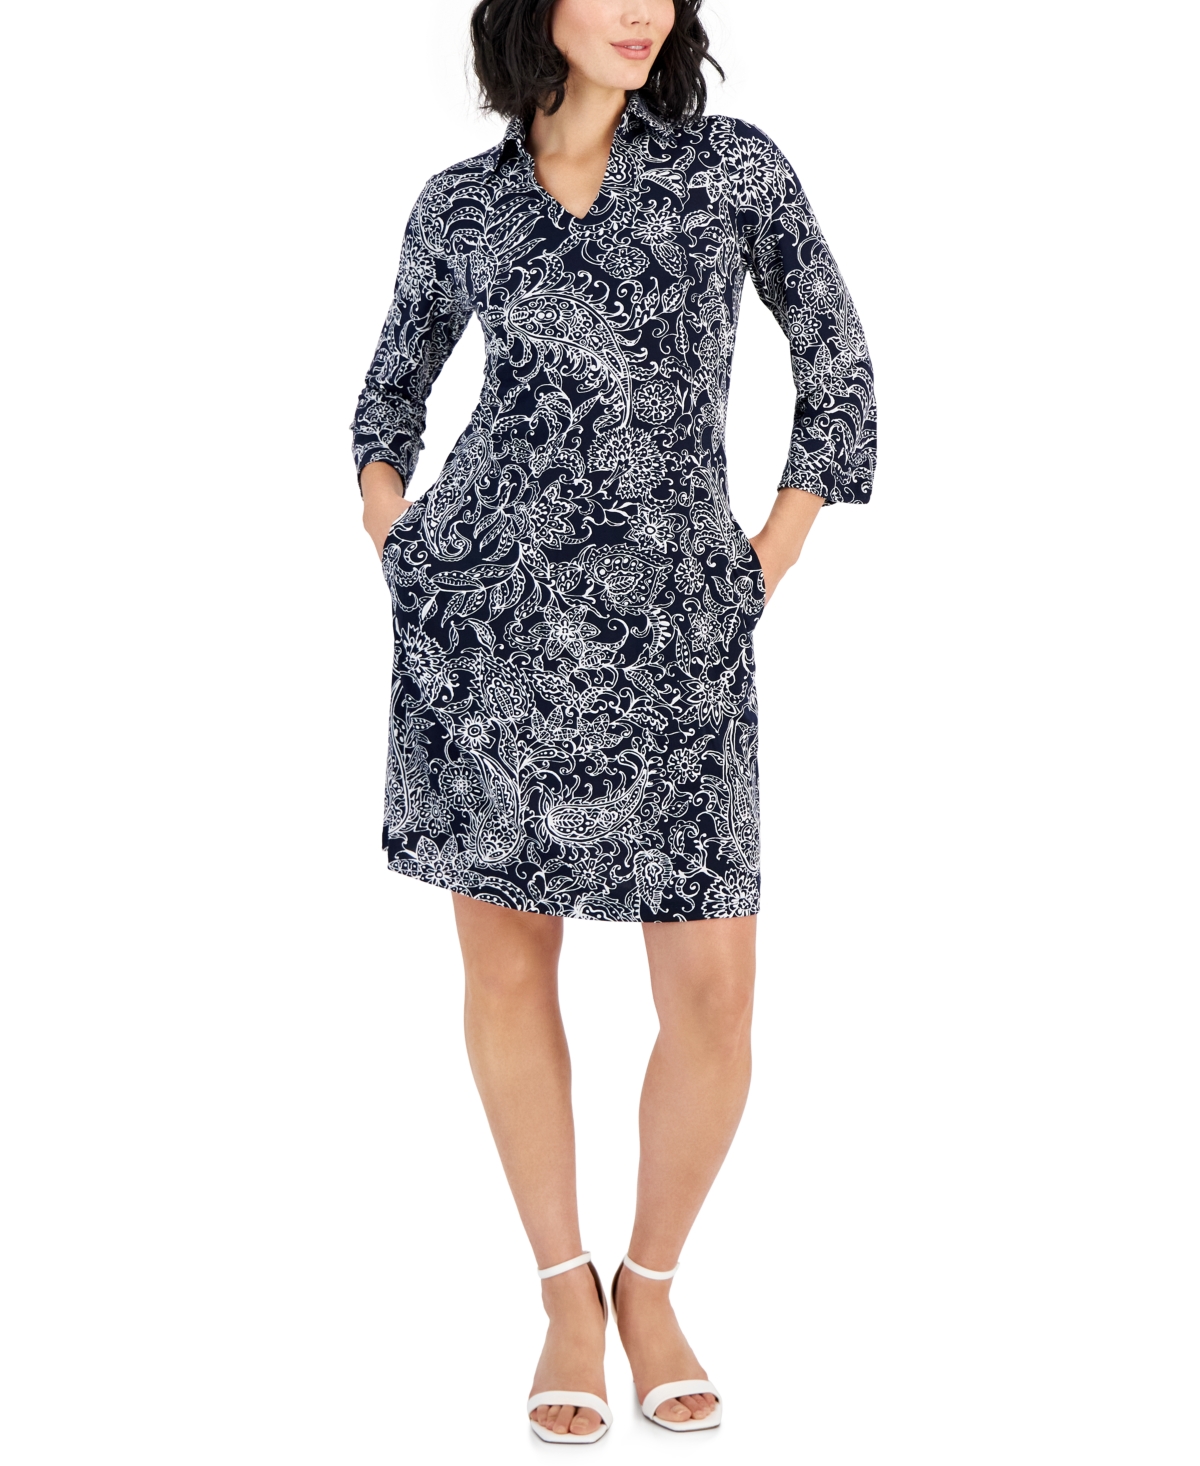 Petite Printed Collared A-Line 34/-Sleeve Dress - Navy/white